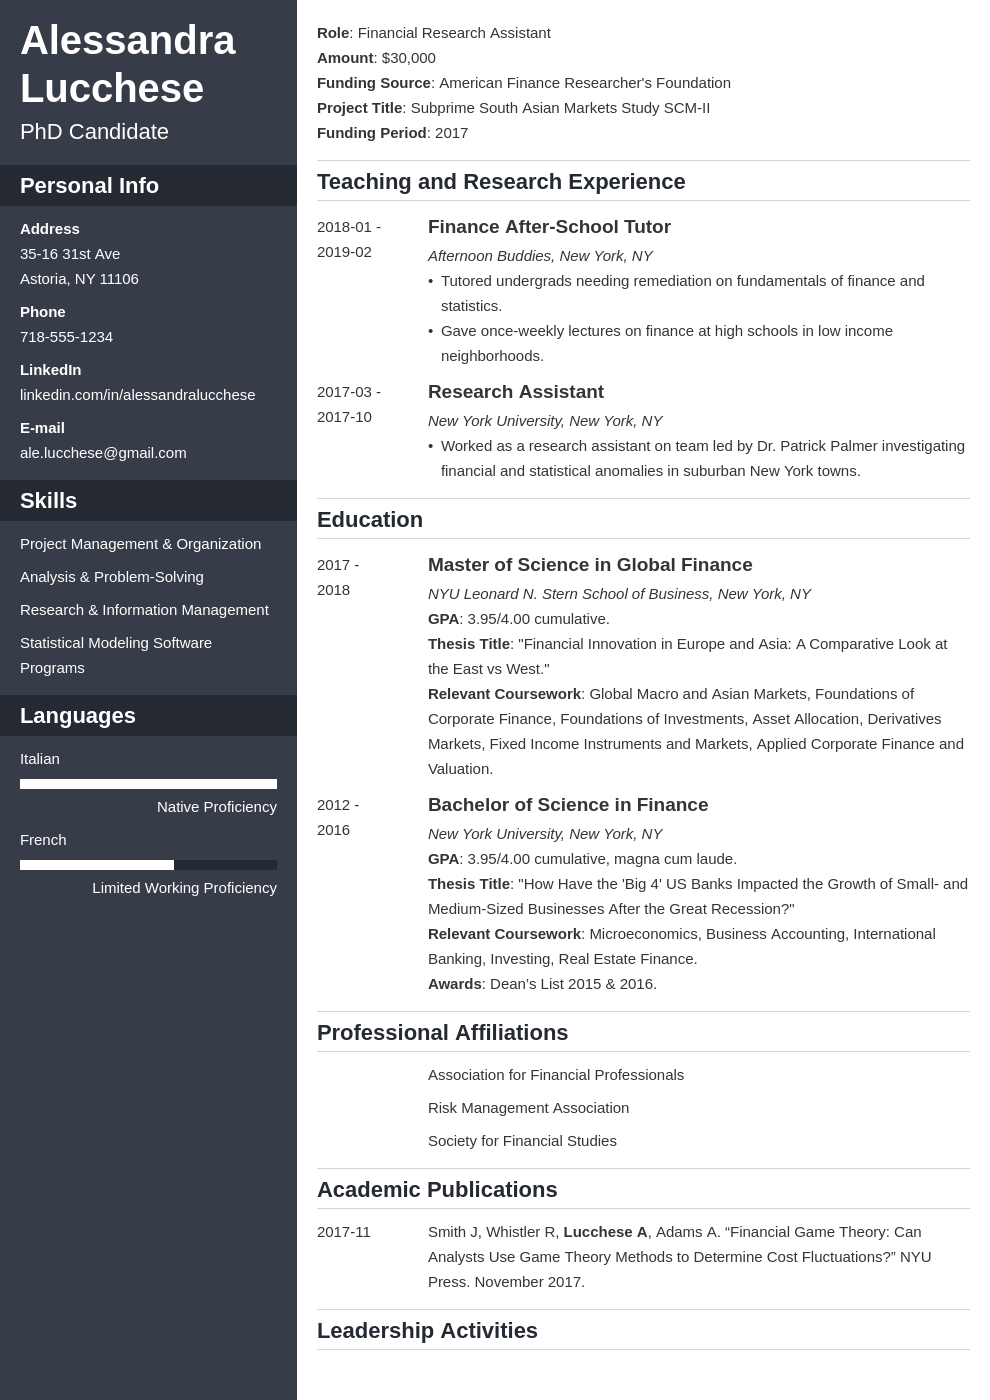 Resume for Graduate School Application [Template & Examples]